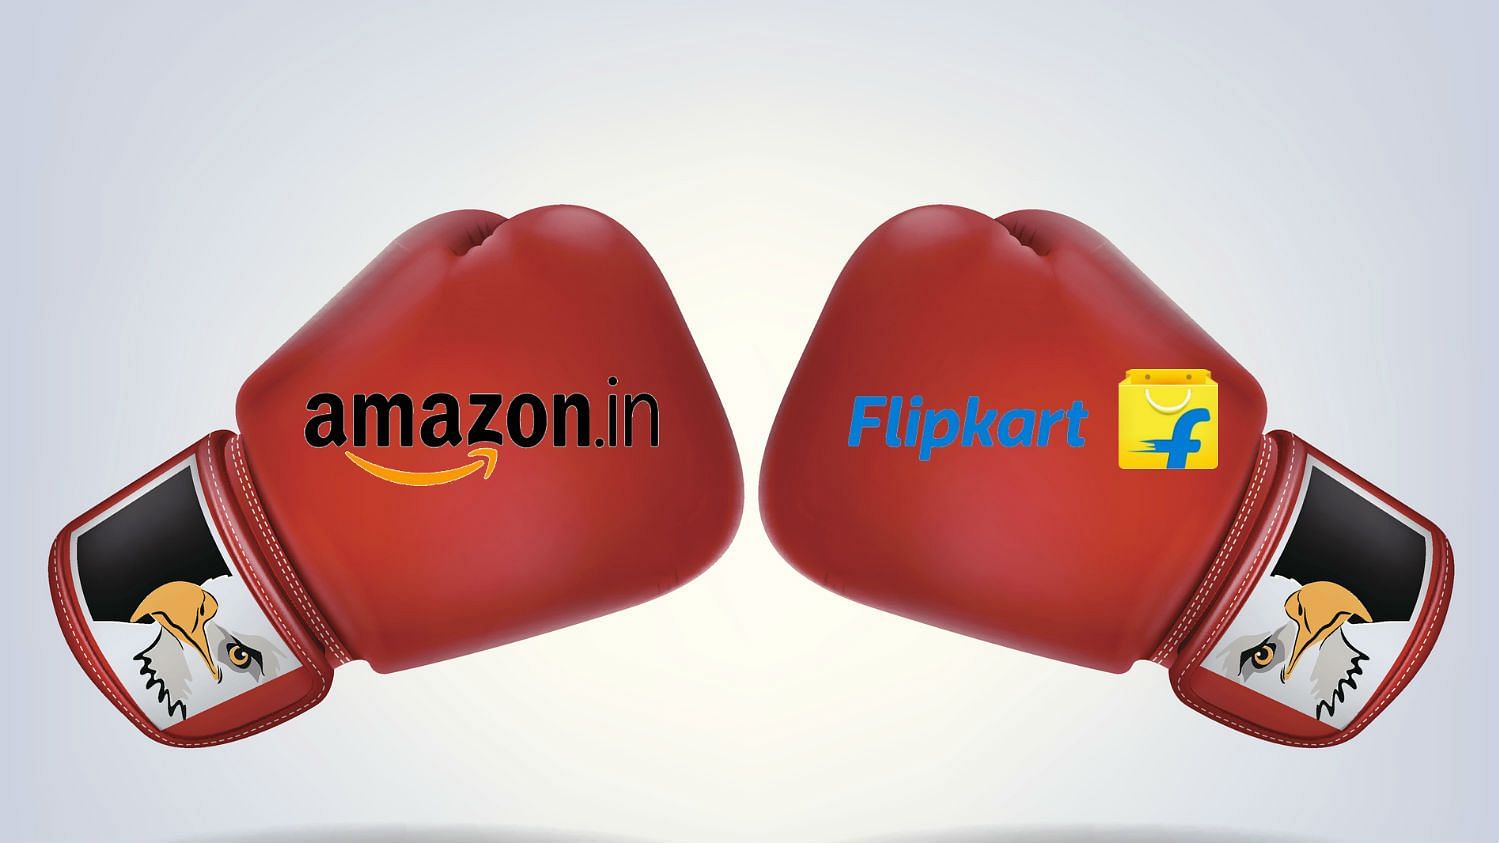 Flipkart is now entering the video streaming space in India.